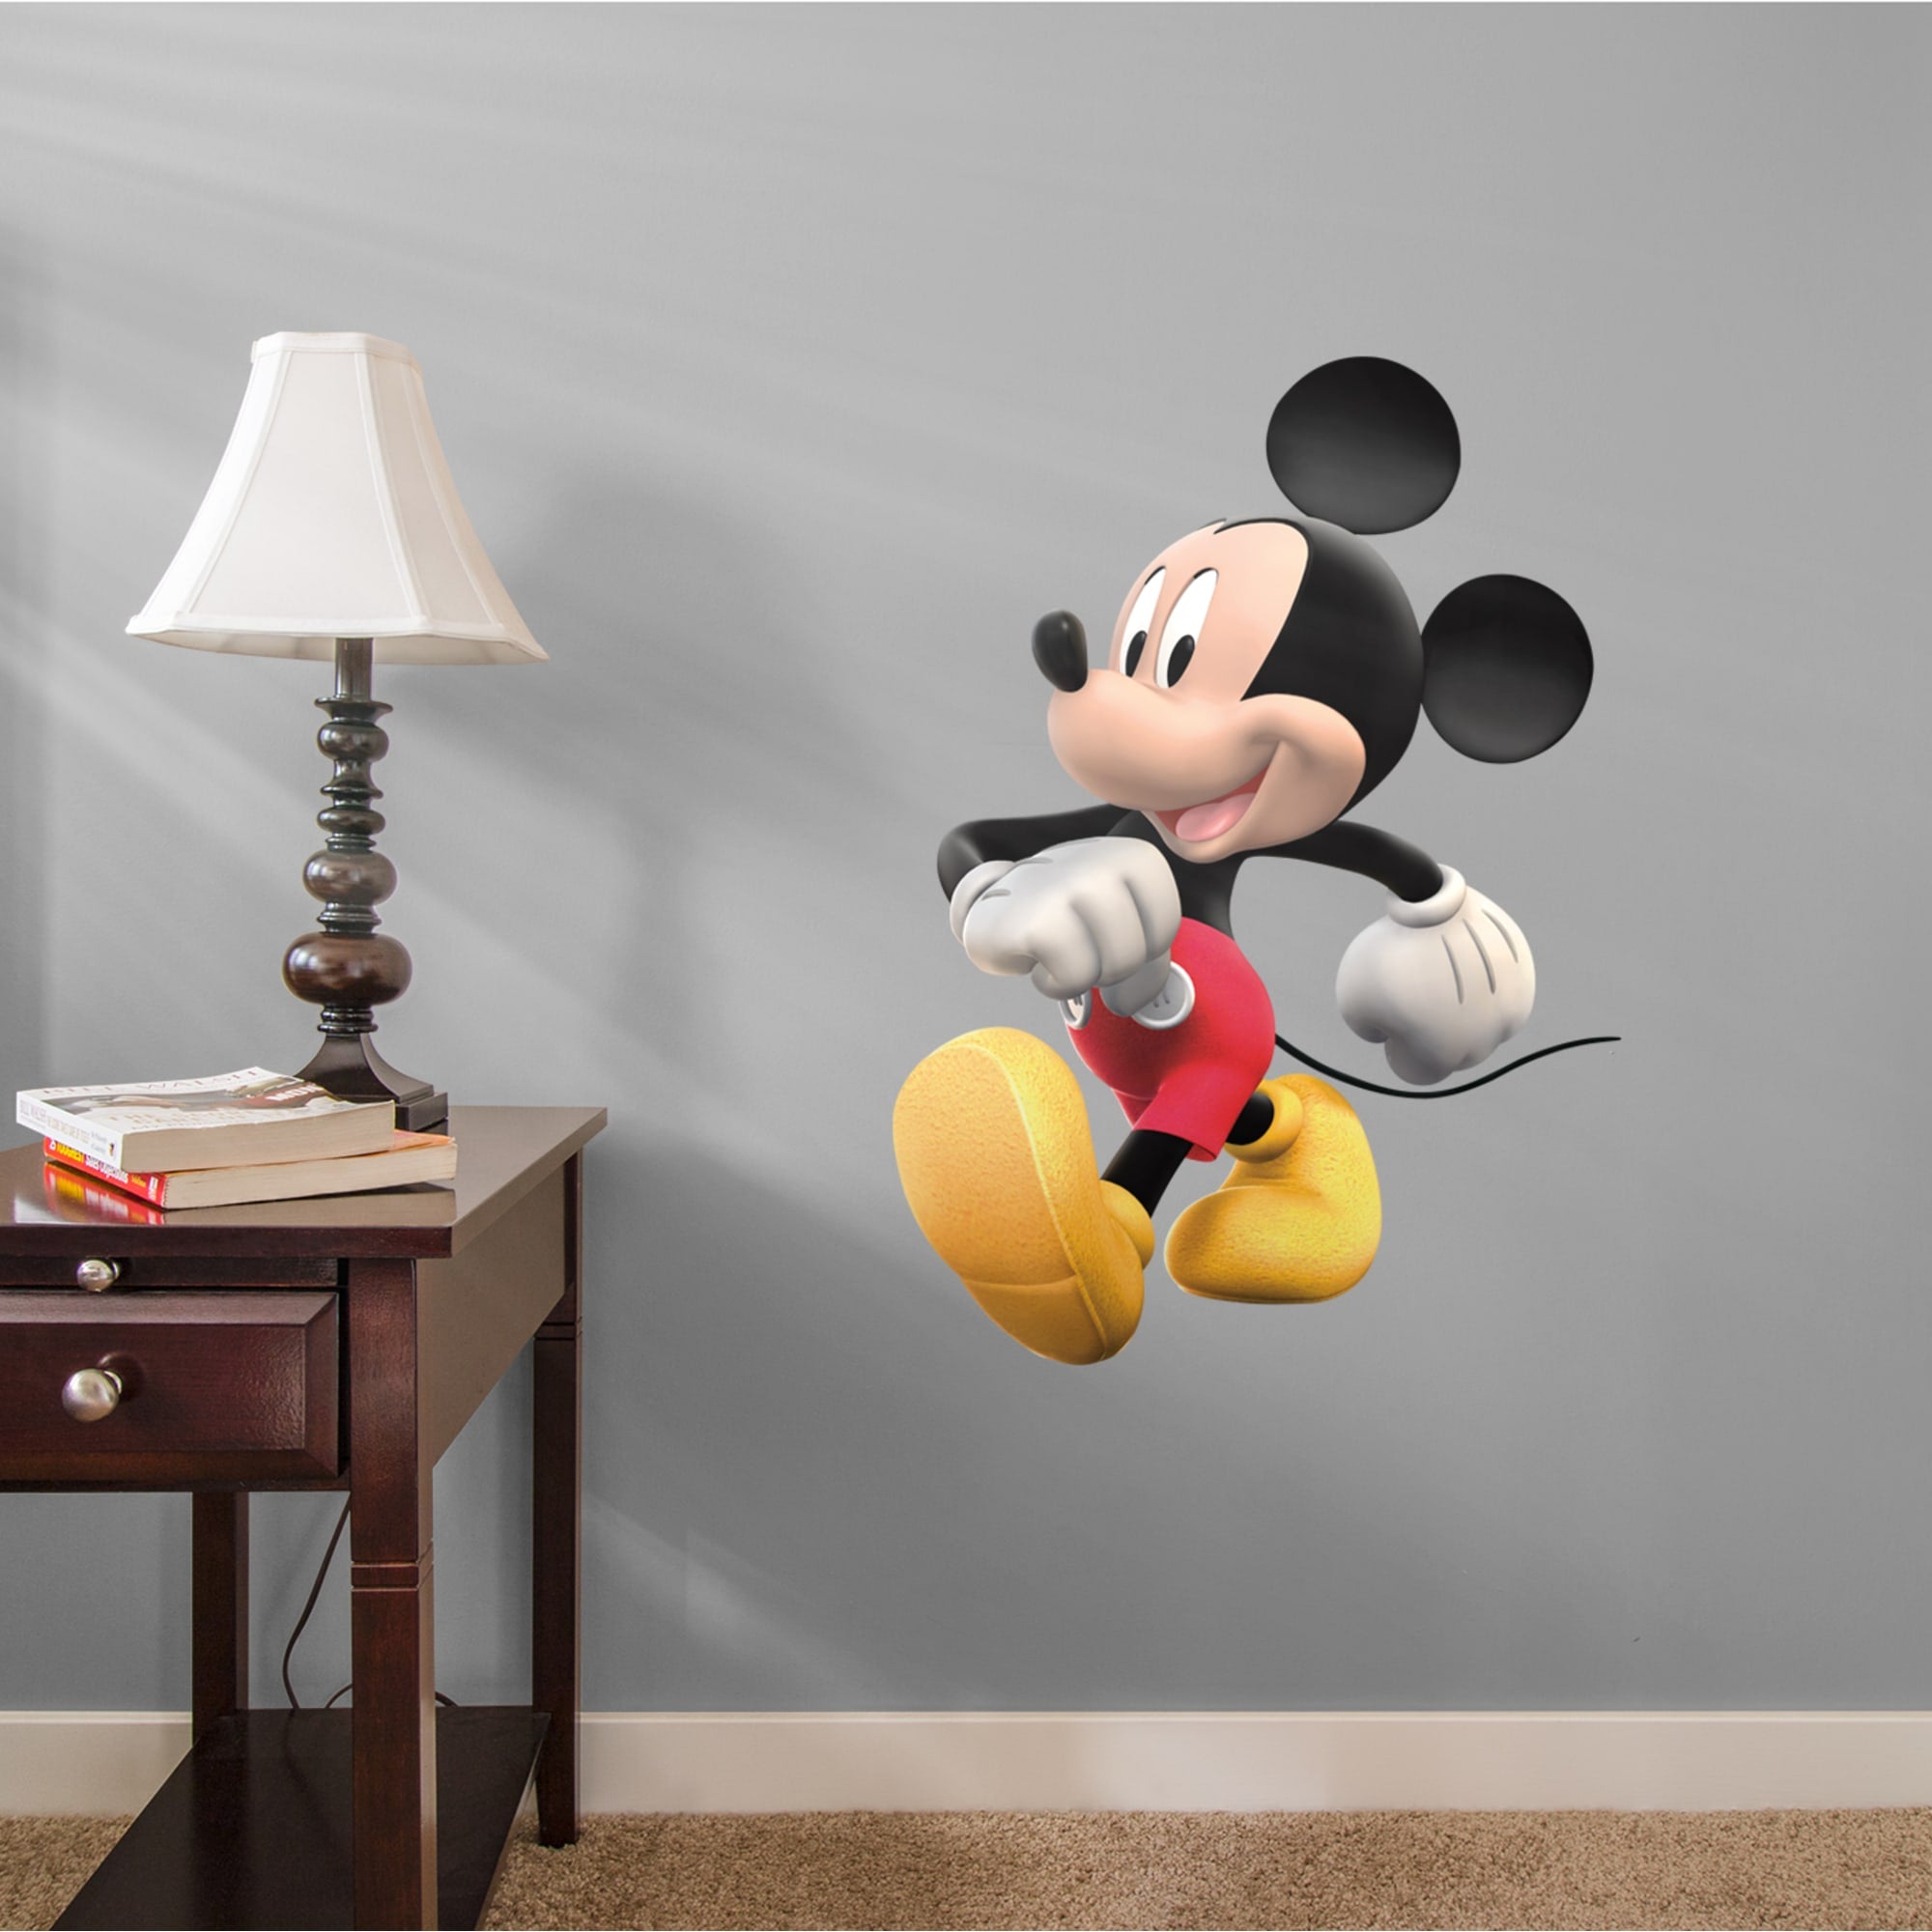 Mickey Mouse - Officially Licensed Disney Removable Wall Decal 25.0"W x 31.0"H by Fathead | Vinyl